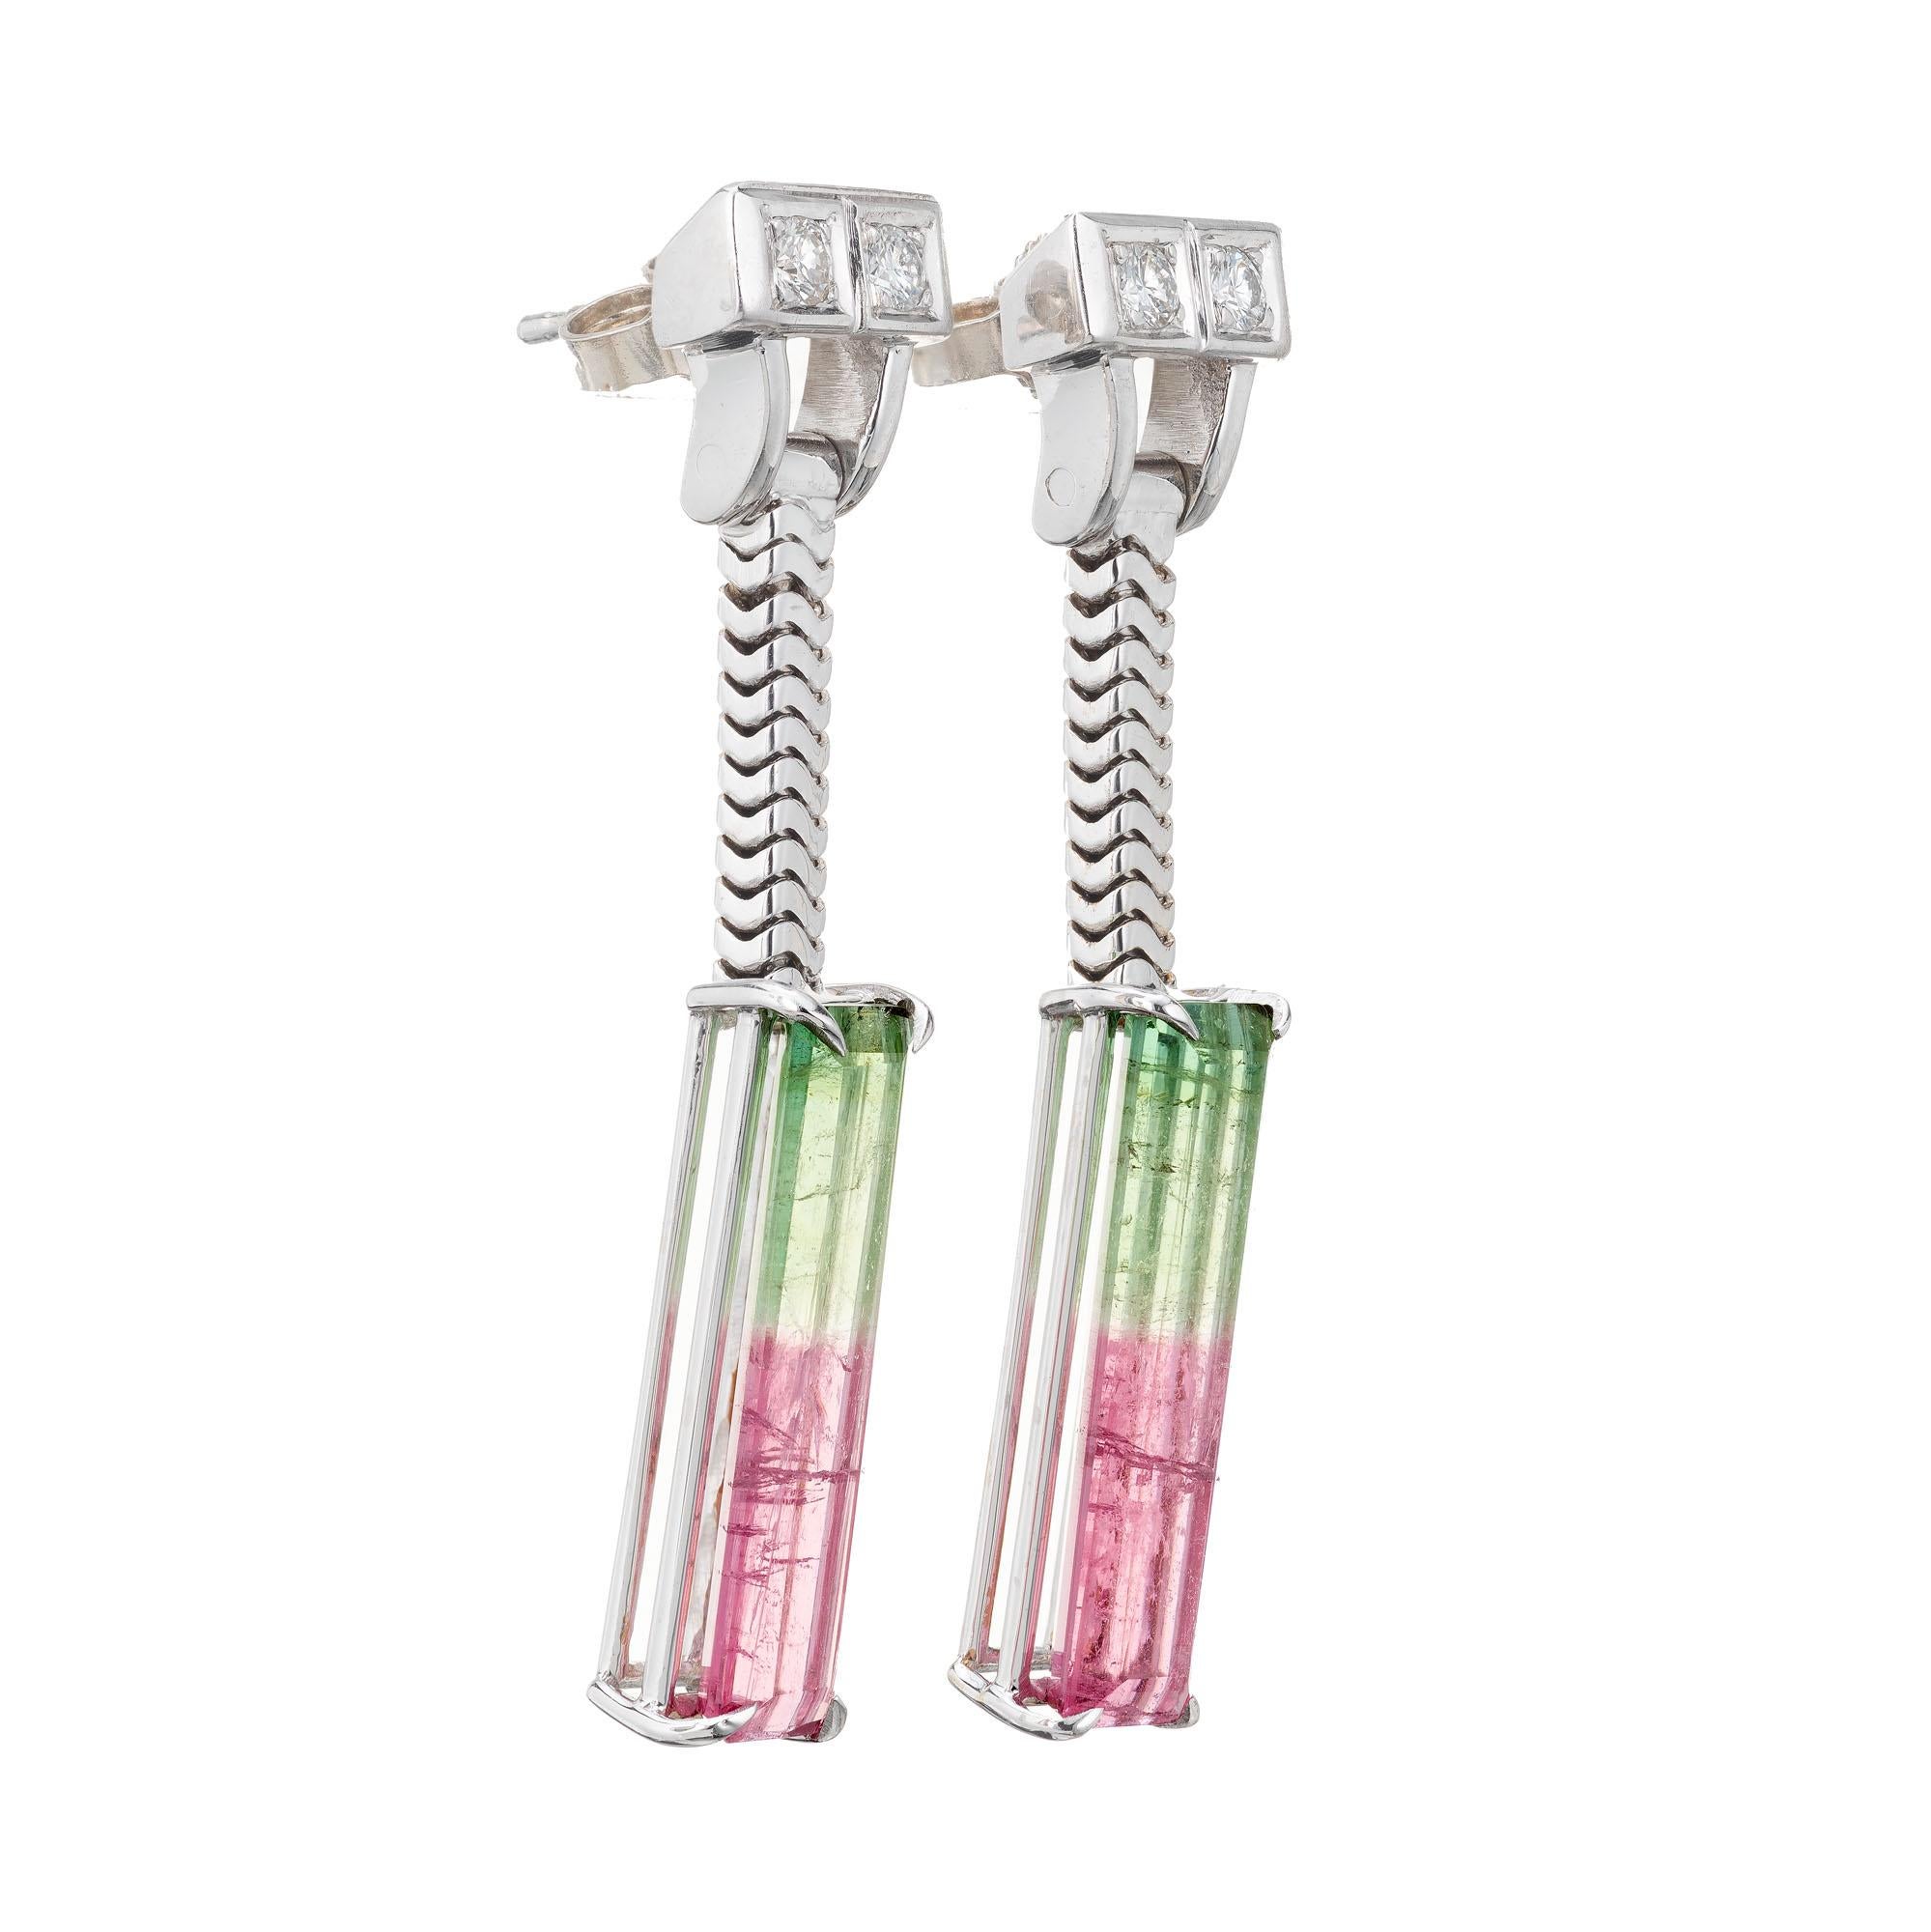 Art Deco dangle tourmaline earrings with diamond accent tops. 14k White gold snake chain dangle and a matched pair of distinct bi-color pink and green Tourmaline bottoms. Circa 1940-1950.

2 natural pink and green Tourmaline, approx. total weight